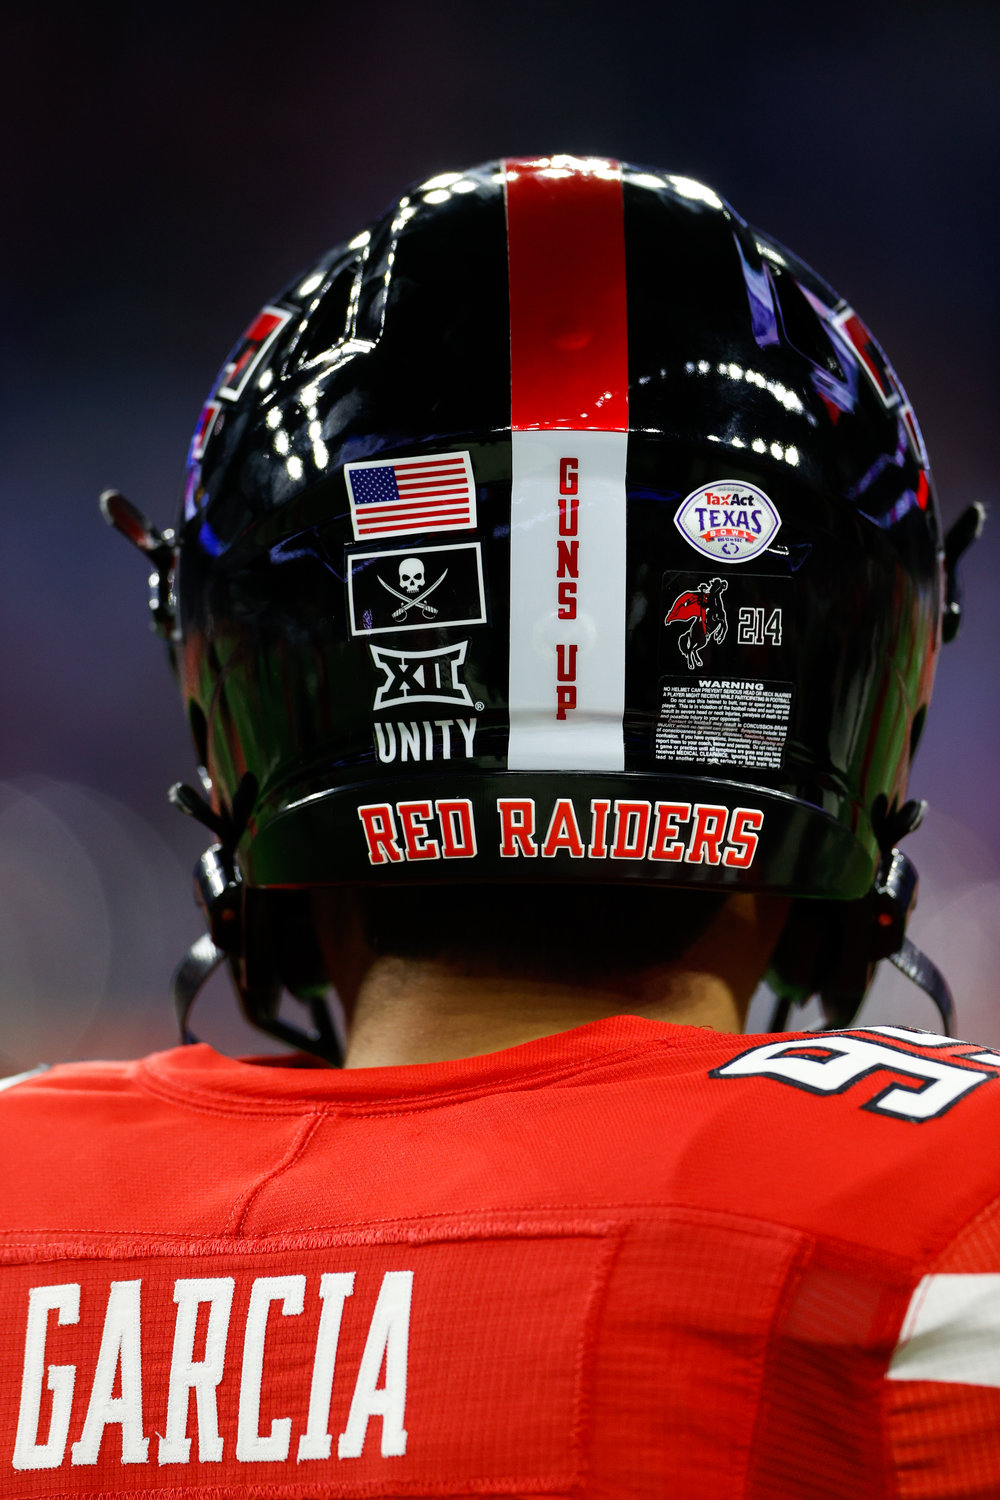 Texas Tech place kicker Gino Garcia (99) warms up on the field prior to the start of the TaxAct Texas Bowl on Dec. 28, 2022 in Houston. The Red Raiders’ helmets include a pirate flag in honor of former Texas Tech head coach Mike Leach, who passed away on Dec. 12.